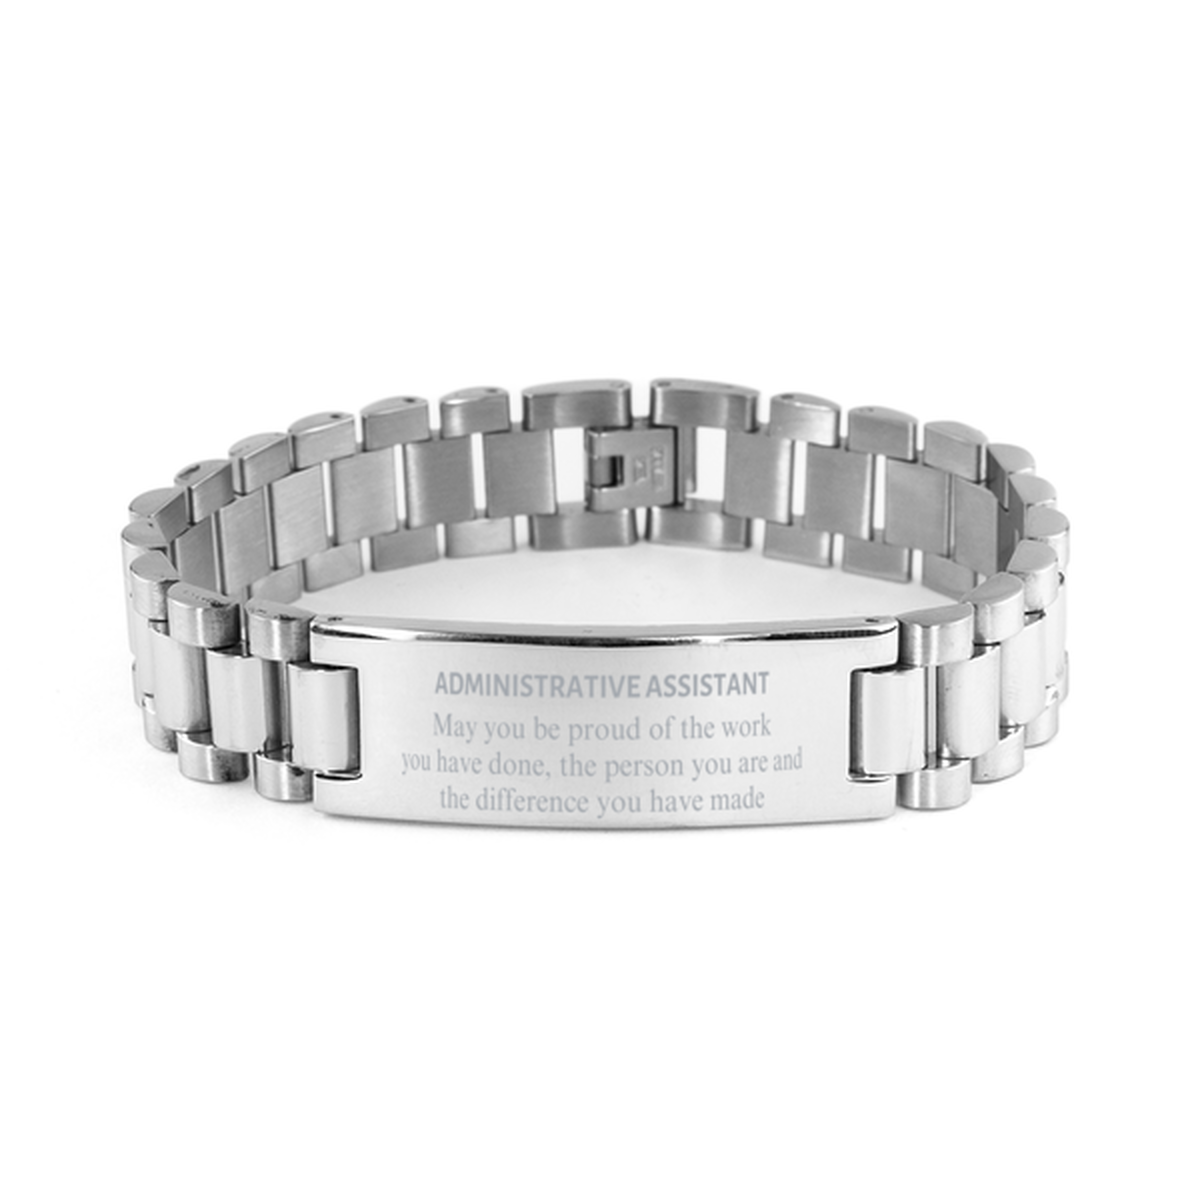 Administrative Assistant May you be proud of the work you have done, Retirement Administrative Assistant Ladder Stainless Steel Bracelet for Colleague Appreciation Gifts Amazing for Administrative Assistant